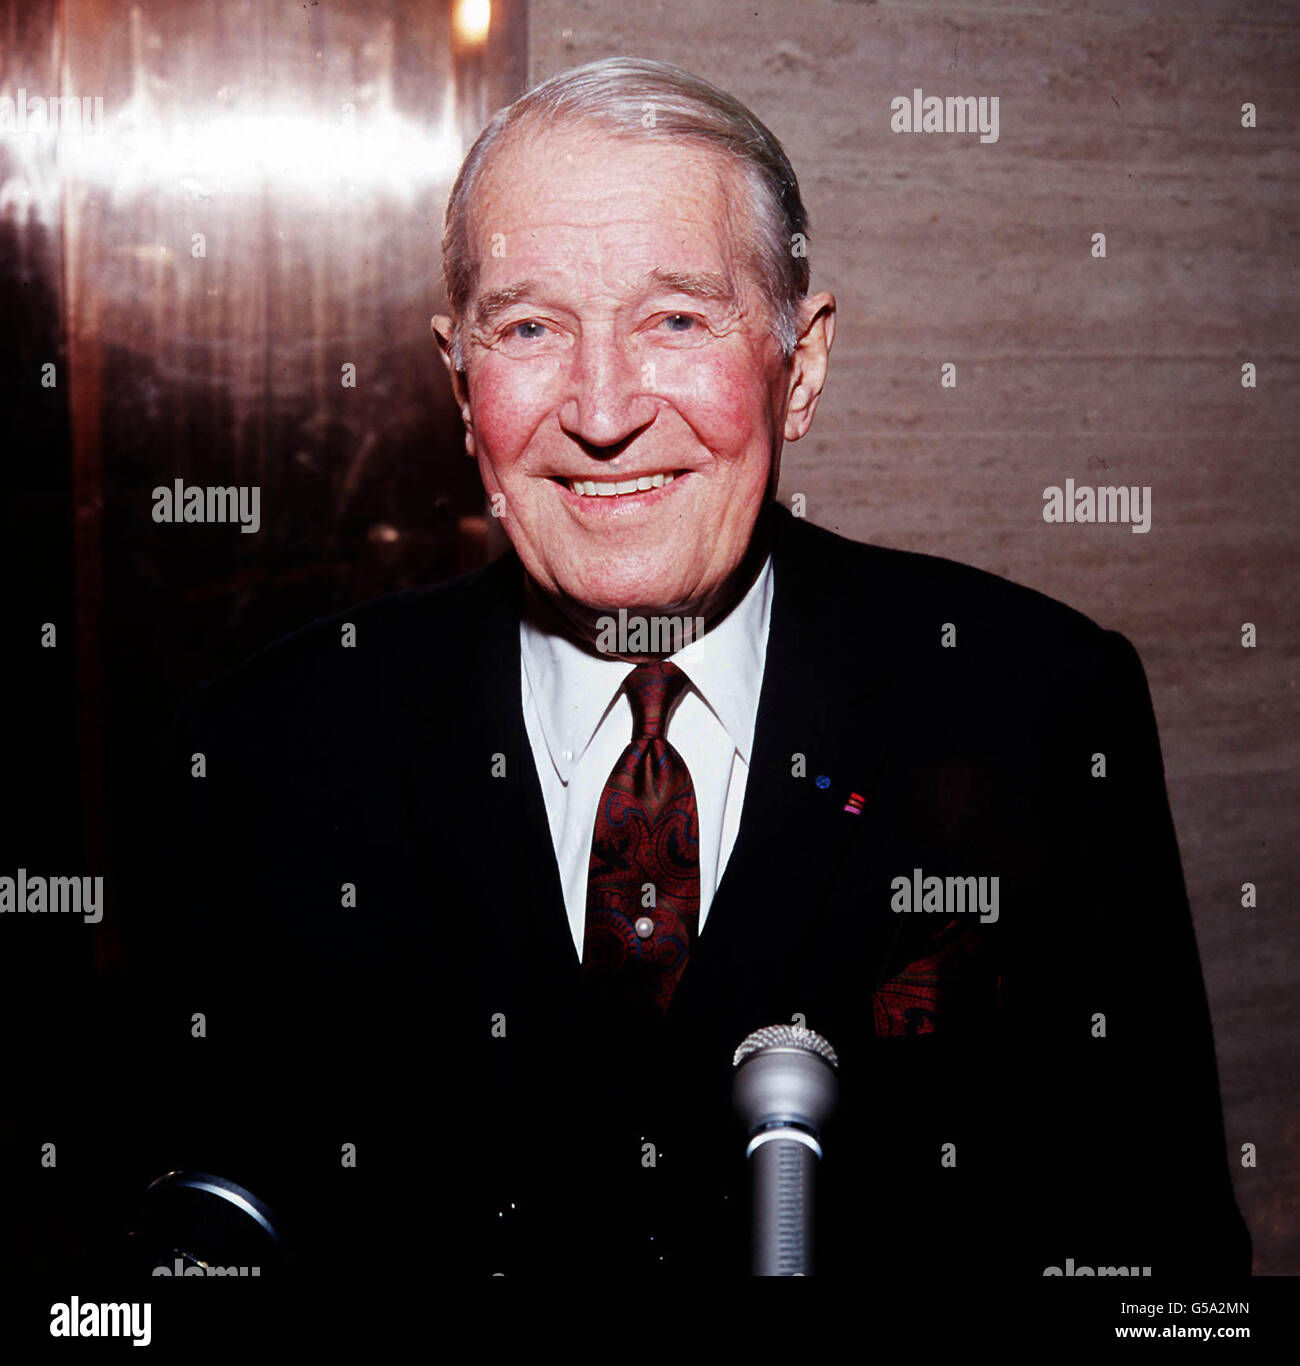 MAURICE CHEVALIER 1968: French entertainer Maurice Chevalier smiles for the camera at a London Press conference for the start of his farewell tour. Stock Photo